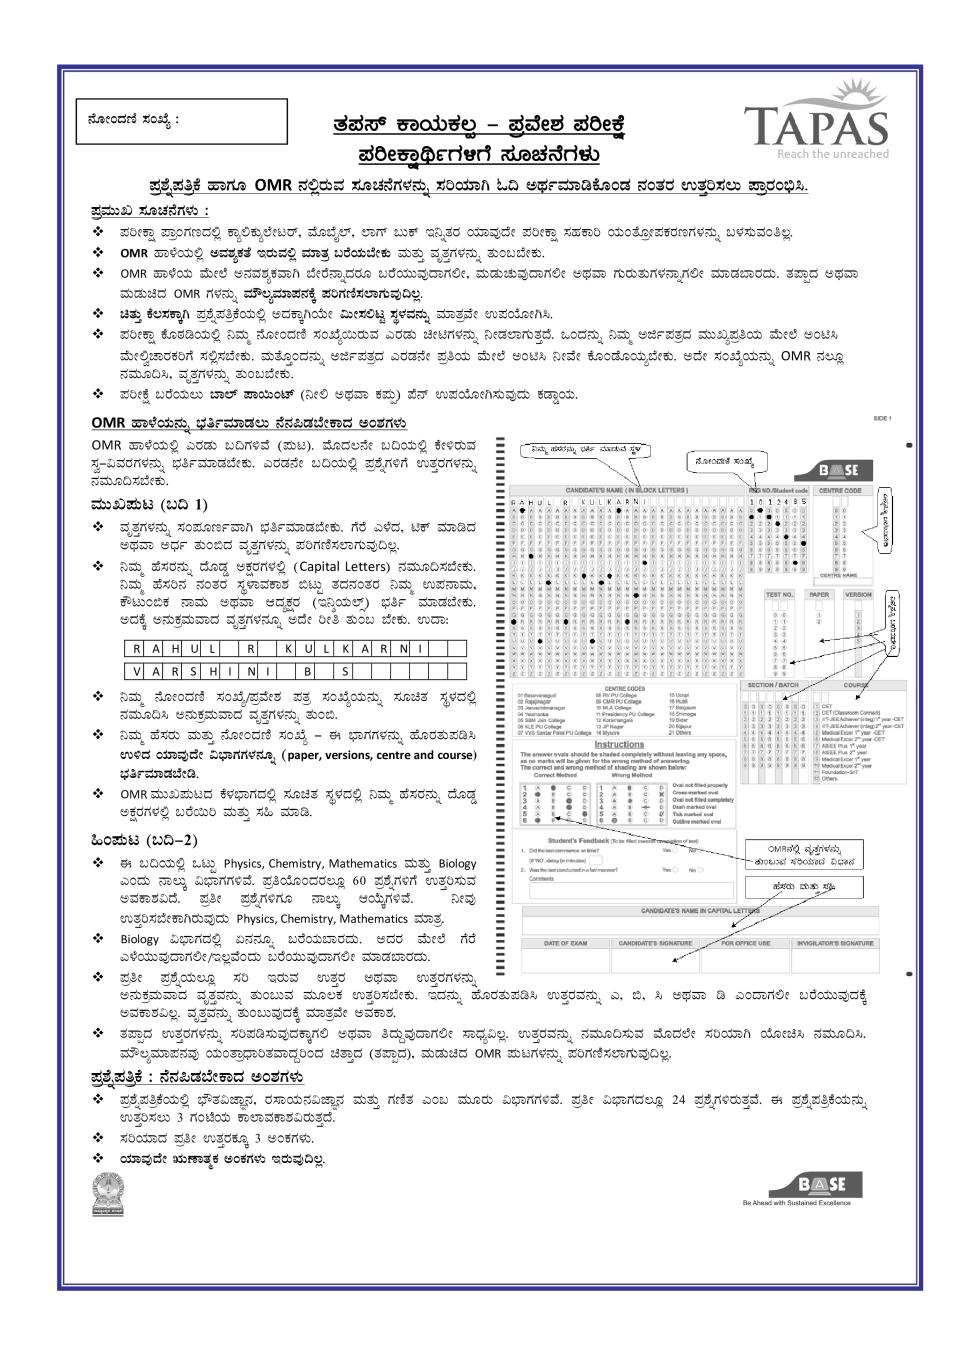 TAPAS Entrance Exam Sample Question Papers 2014 - Page 1